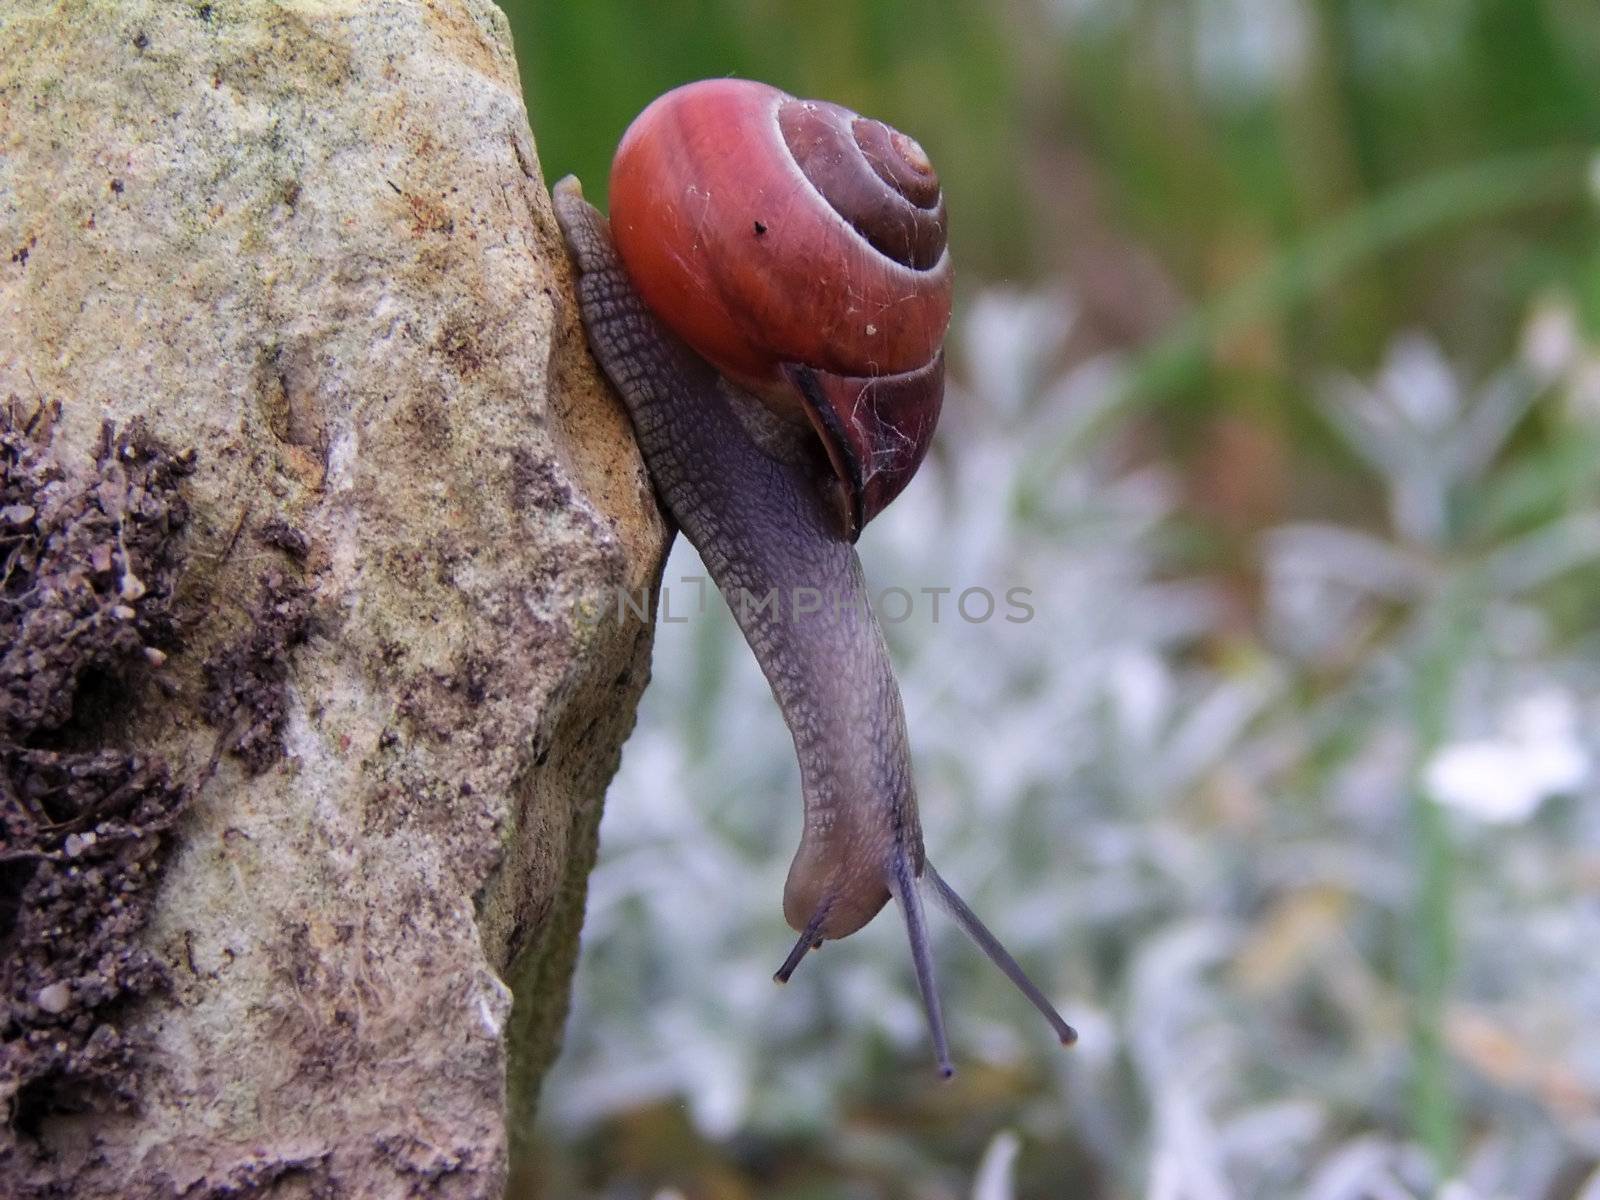 Curious snail before he fall down